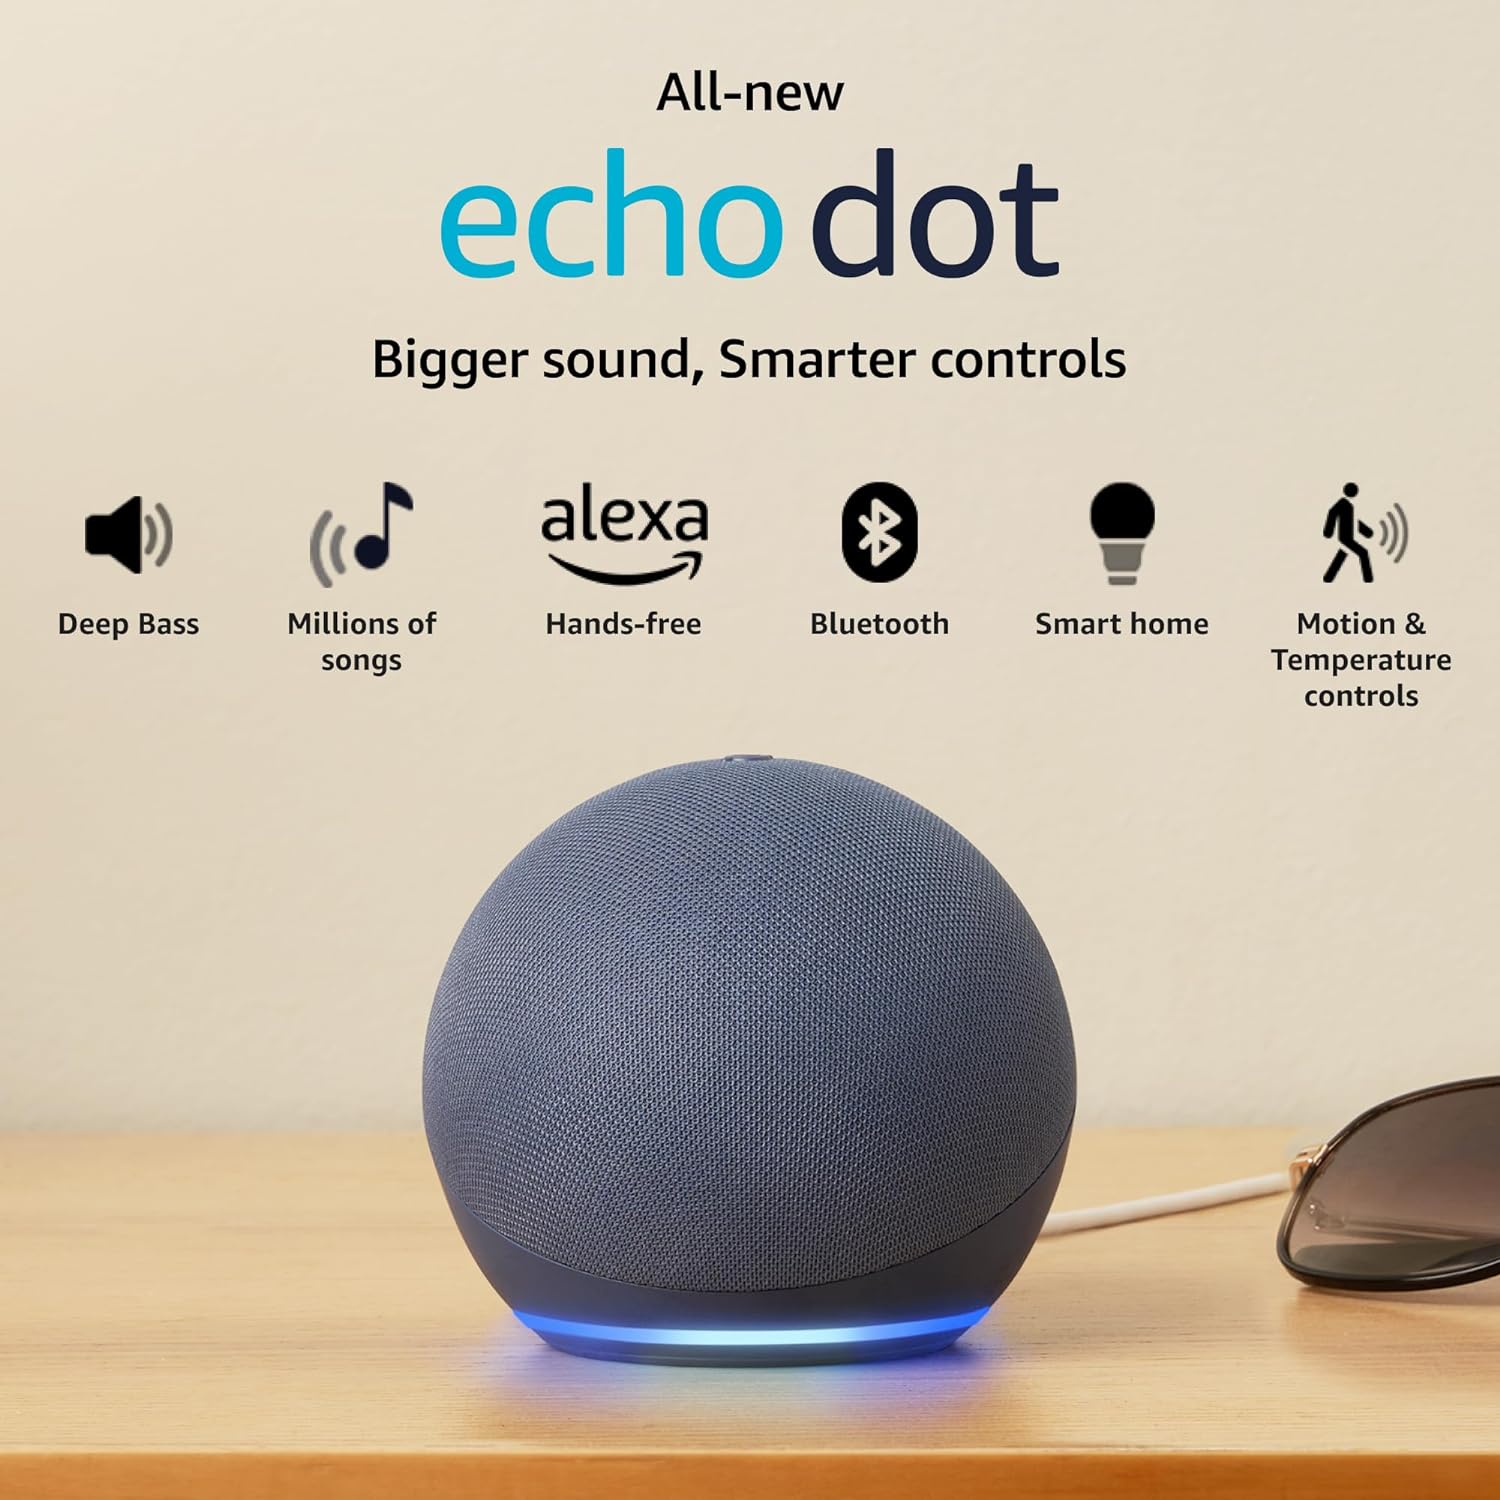 Liked that,Echo Dot 5 can be used as external bluetooth speaker even for 2nd generation Fire TV stick attached to older non smart HDMI TV.It also controlled the 2nd generation Fire TV stick to open applications & all on TV,do some searches on TV as well.It has temperature sensor & some ultrasound sensor which couldn't be tested without more smart devices.The bass sound is good from small speaker. Mics are nice & sensitive enough.It came preconfigured & connected directly from Amazon cloud synced data from 2nd generation Fire TV stick. Didnot like no rechargable battery included.Always a corded wire shows up.Looks bad for a smart device. Didnot like clock & temperature not displayed yet. Did not like Echo Dot 5 showing device not compatible for auto updated 2nd generation Fire tv stick to become home theater system.Even after 2nd generation Fire TV stick was updated from Settings-->Fire TV-->Install updates several times & restarted till it showed latest up to date Fire TV OS. I didnot like vendor lockin for common man. Till date,There is no Interoperability with compatibility between Fire OS,Fire TV Stick 2nd generation,Echo Dot 5,Google Assistant,Google Nest Mini 2,Google Chrome cast & such smart IOT devices which is much required to make more value for money & make life simpler for all. I did not like there is no standardization of manufacturing standard Gaming remote control pairing standards that can work with Fire TV stick. I did not like that Amazon Luna on Fire TV stick is not allowed in India. I didnot like that,no common interoperability open standards for Virtual reality shopping, gaming & other applications with Echo Dot 5 & other company smart IOT devices are being governed by IEEE or such institutions for net neutrality & better future with more value for money without vendor lockin.